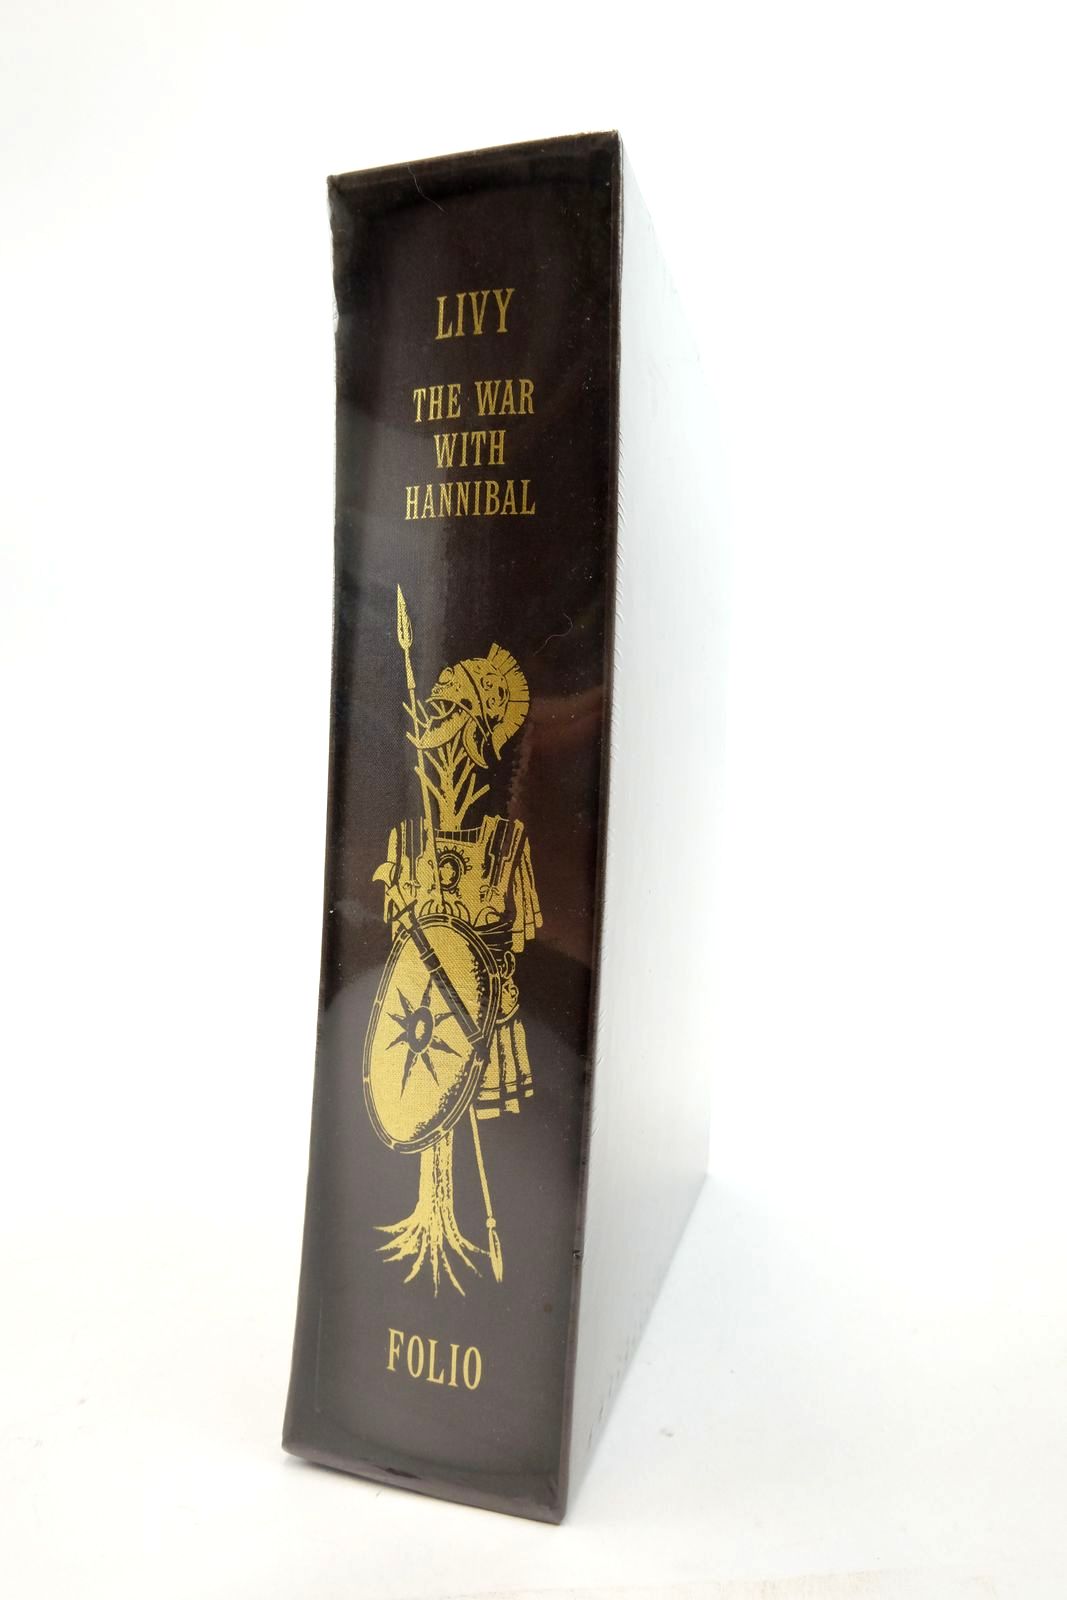 Photo of LIVY THE WAR WITH HANNIBAL written by Livy,  Yardley, J.C. Hoyos, Dexter Barbero, Alessandro published by Folio Society (STOCK CODE: 2136588)  for sale by Stella & Rose's Books